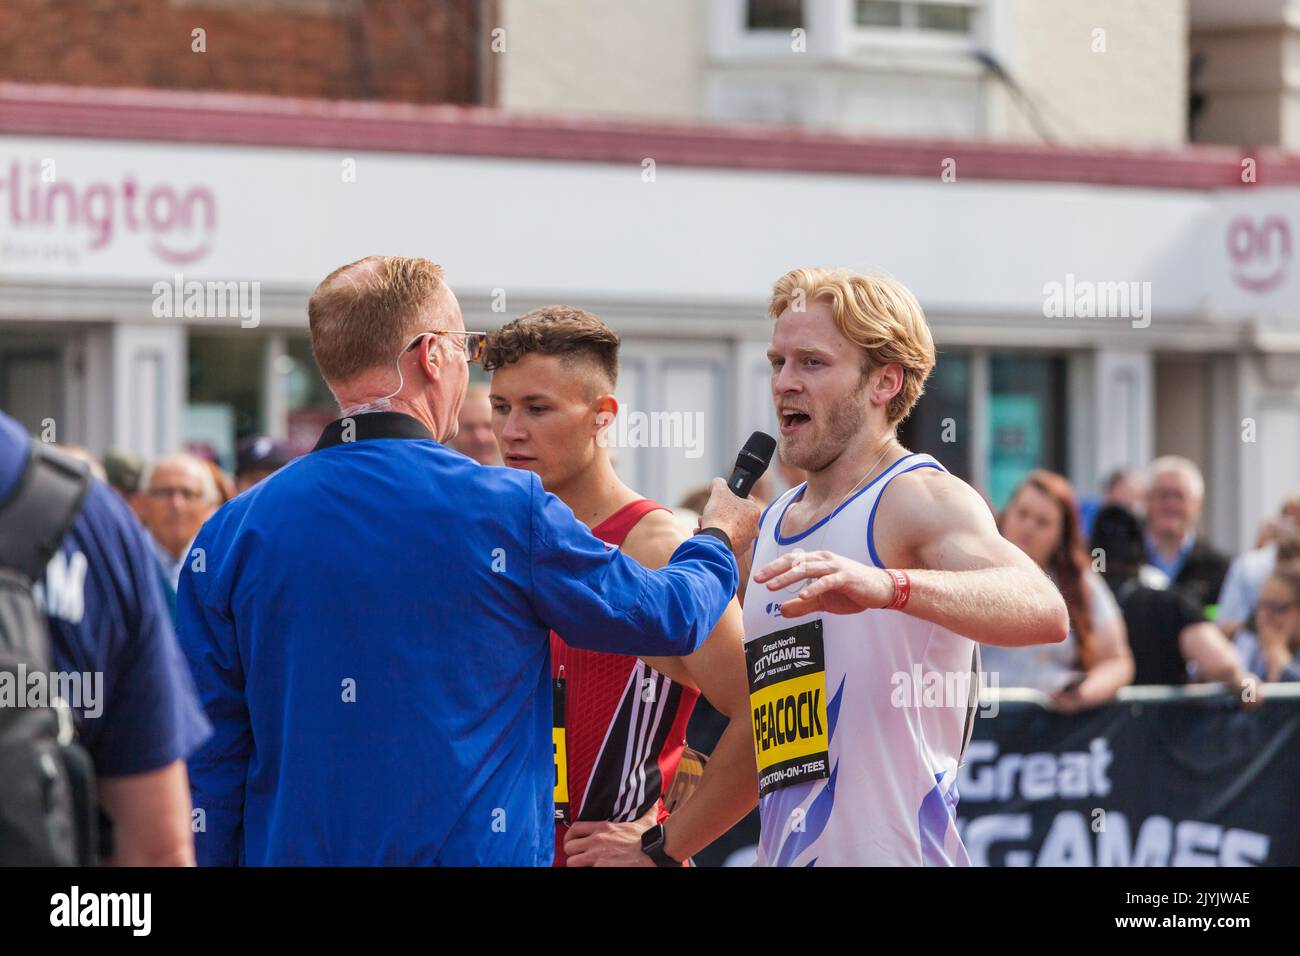 Jonnie Peacock and the other sprinters at the end of their race in the Great North City Games which were held in the High Street,Stockton on Tees,UK Stock Photo